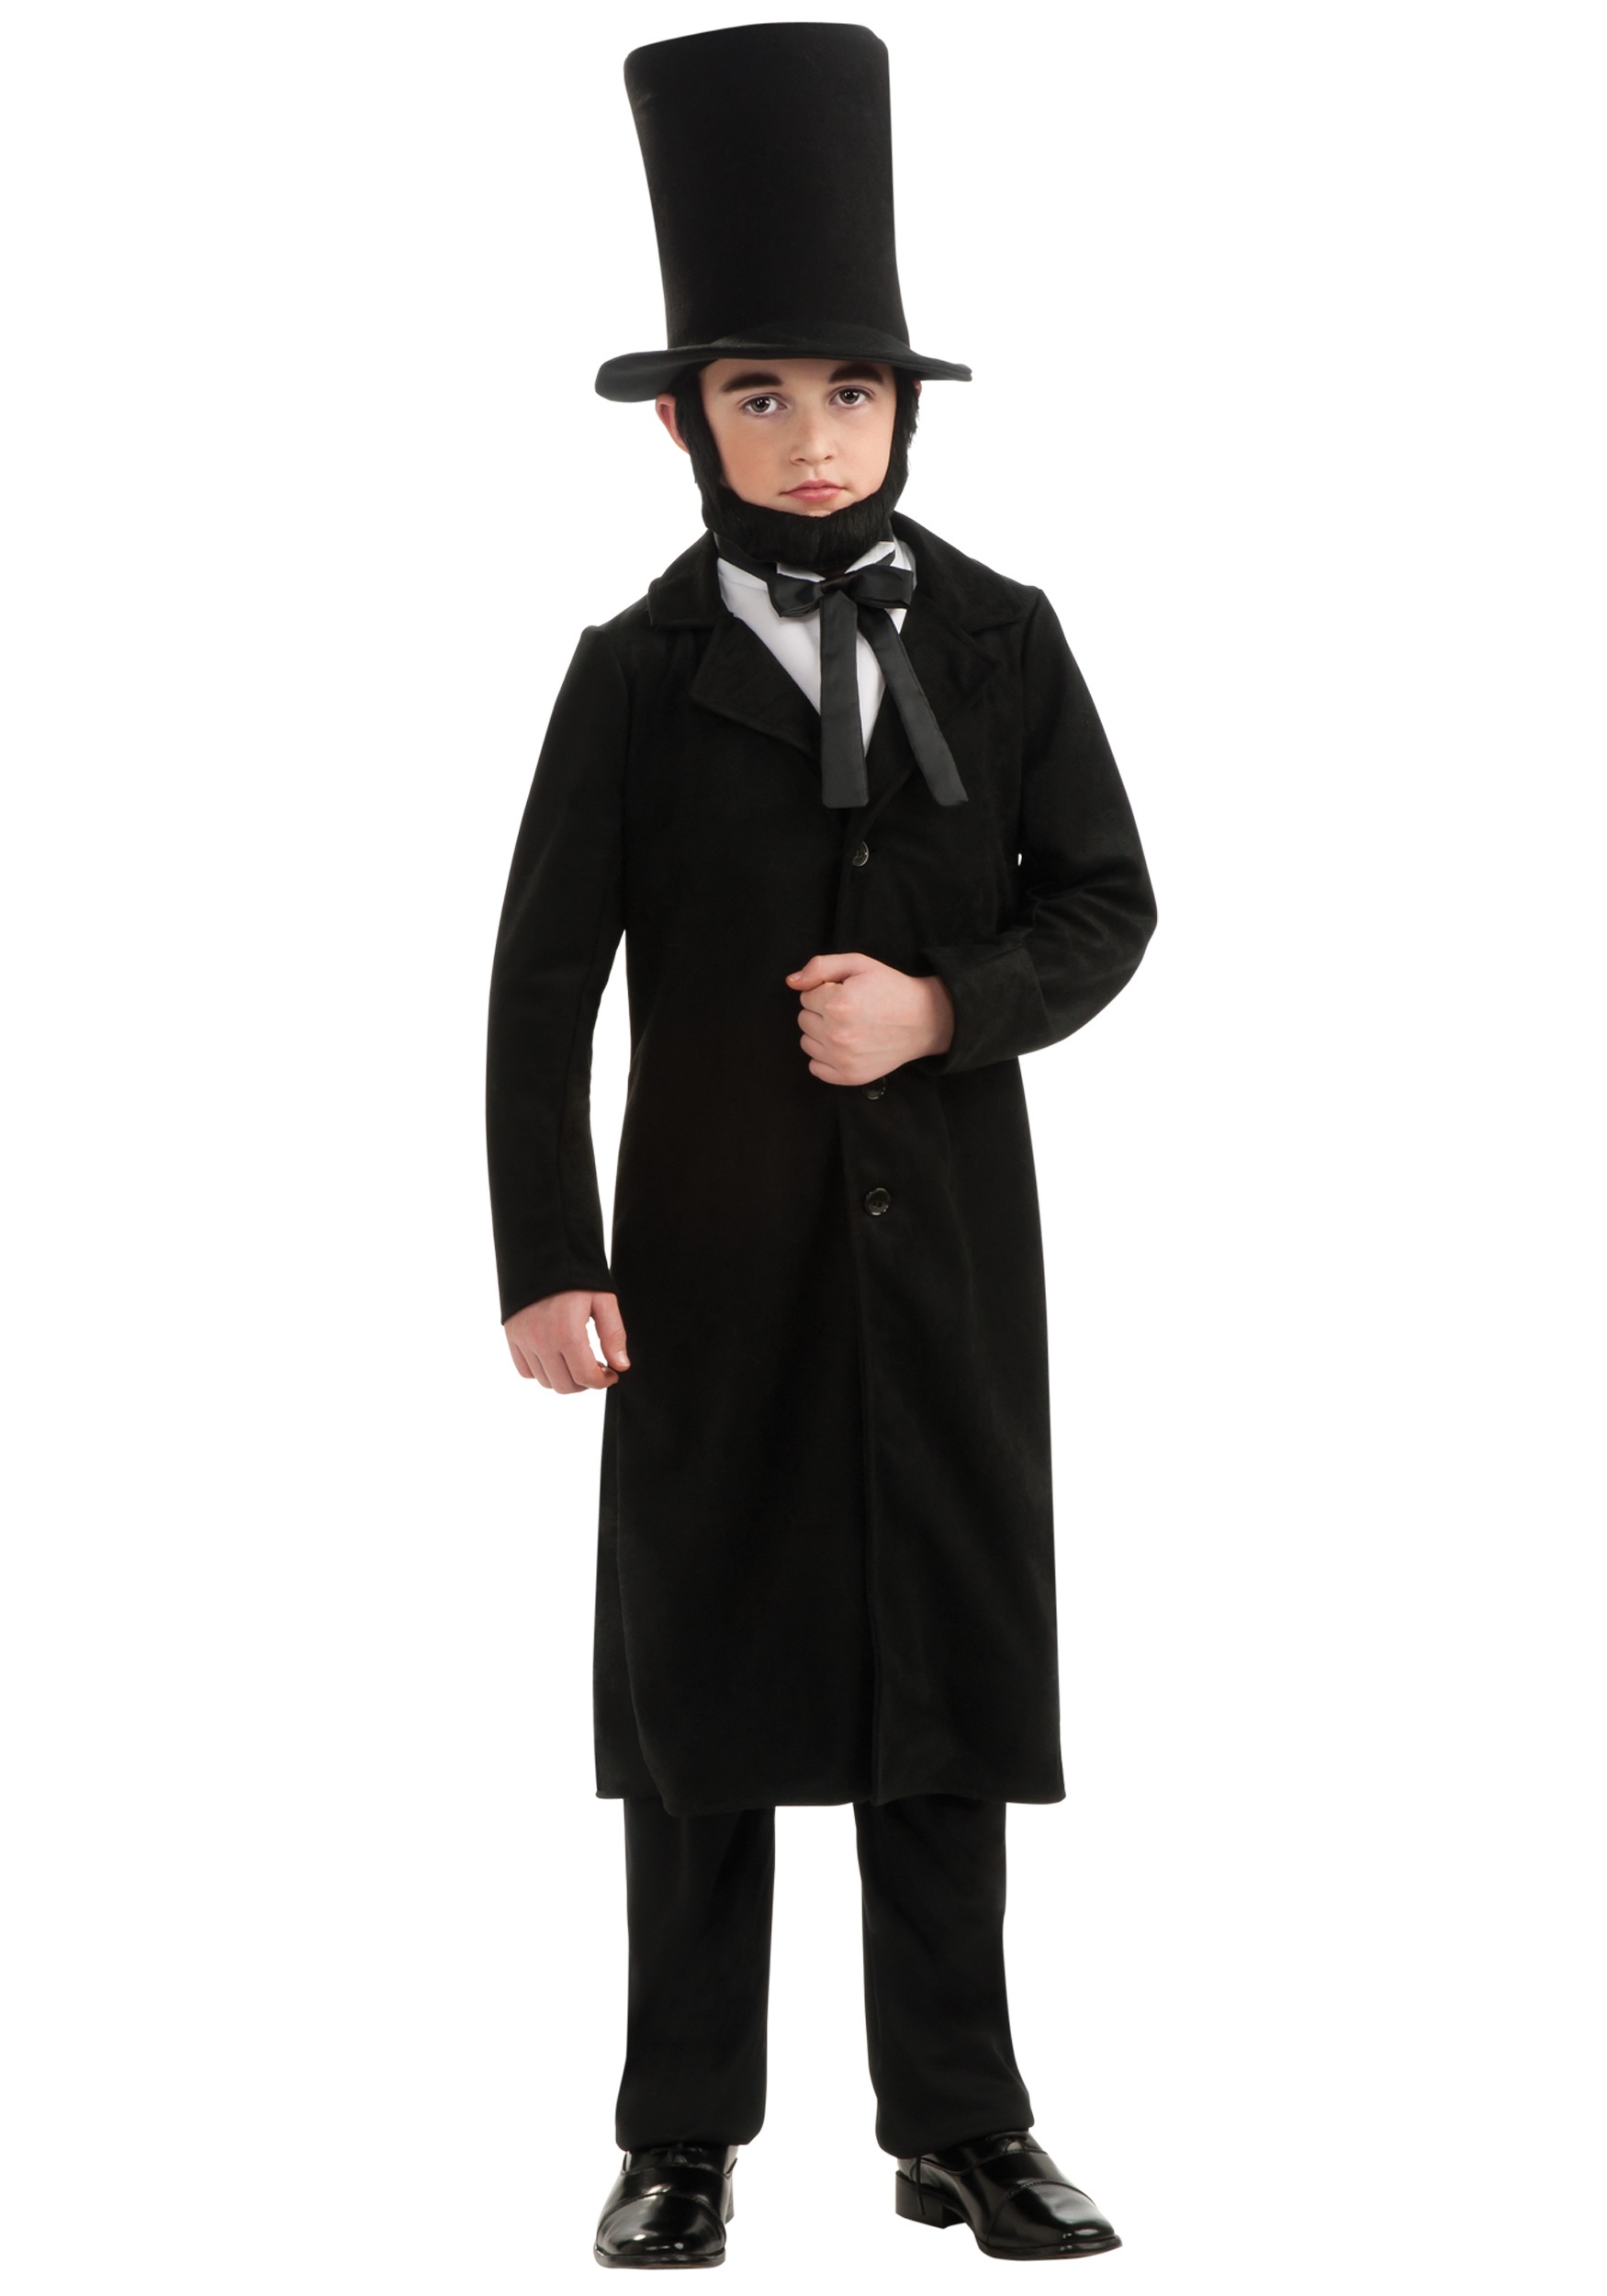 Abe Lincoln Costume for Boys